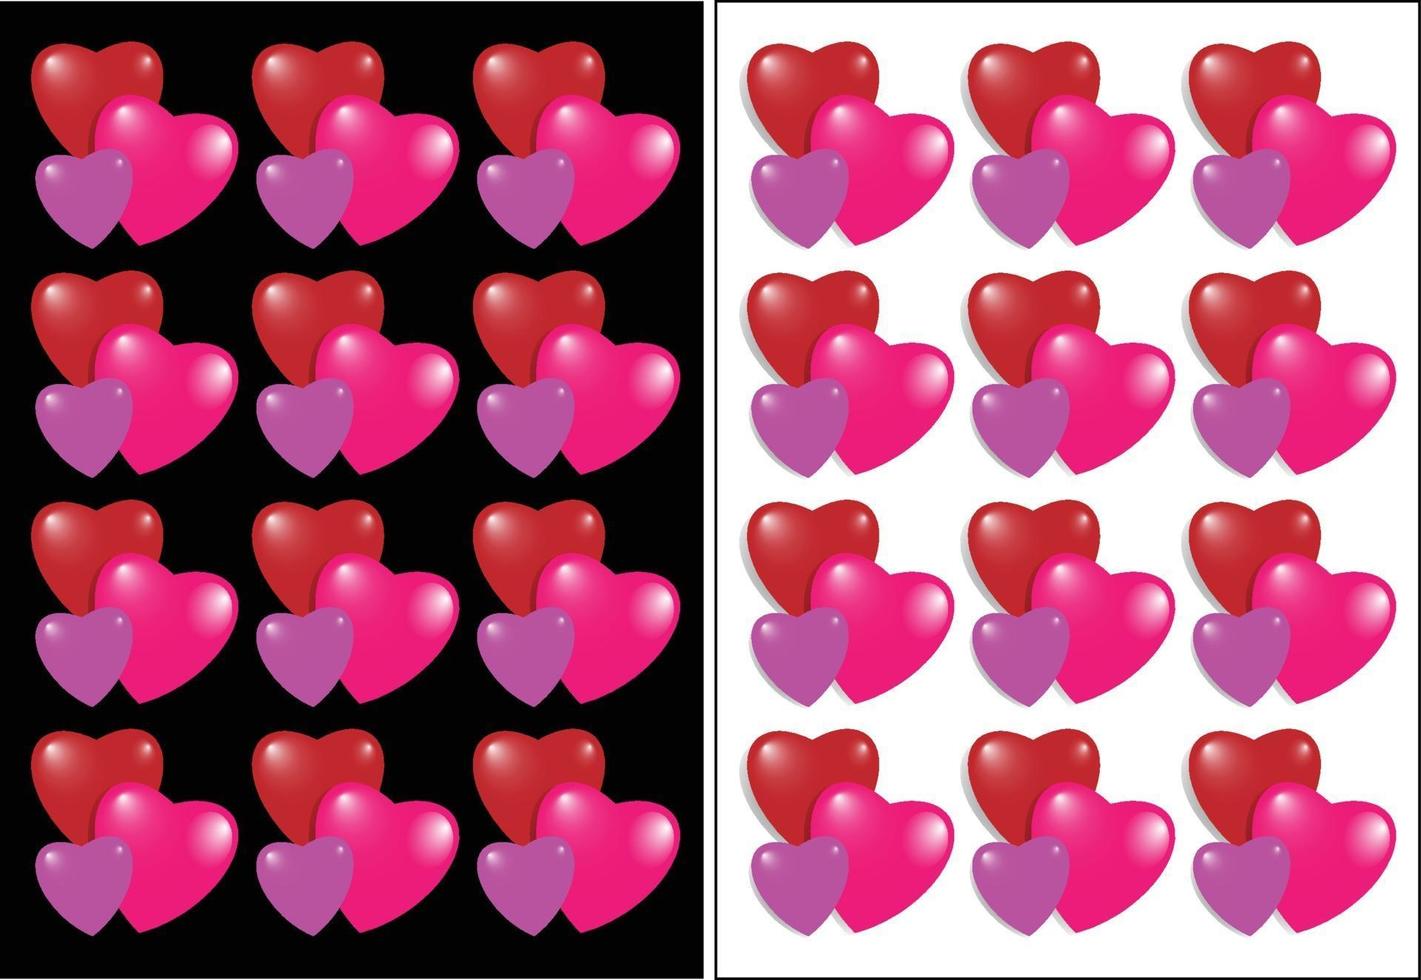 Pink love heart pattern with black and white background vector